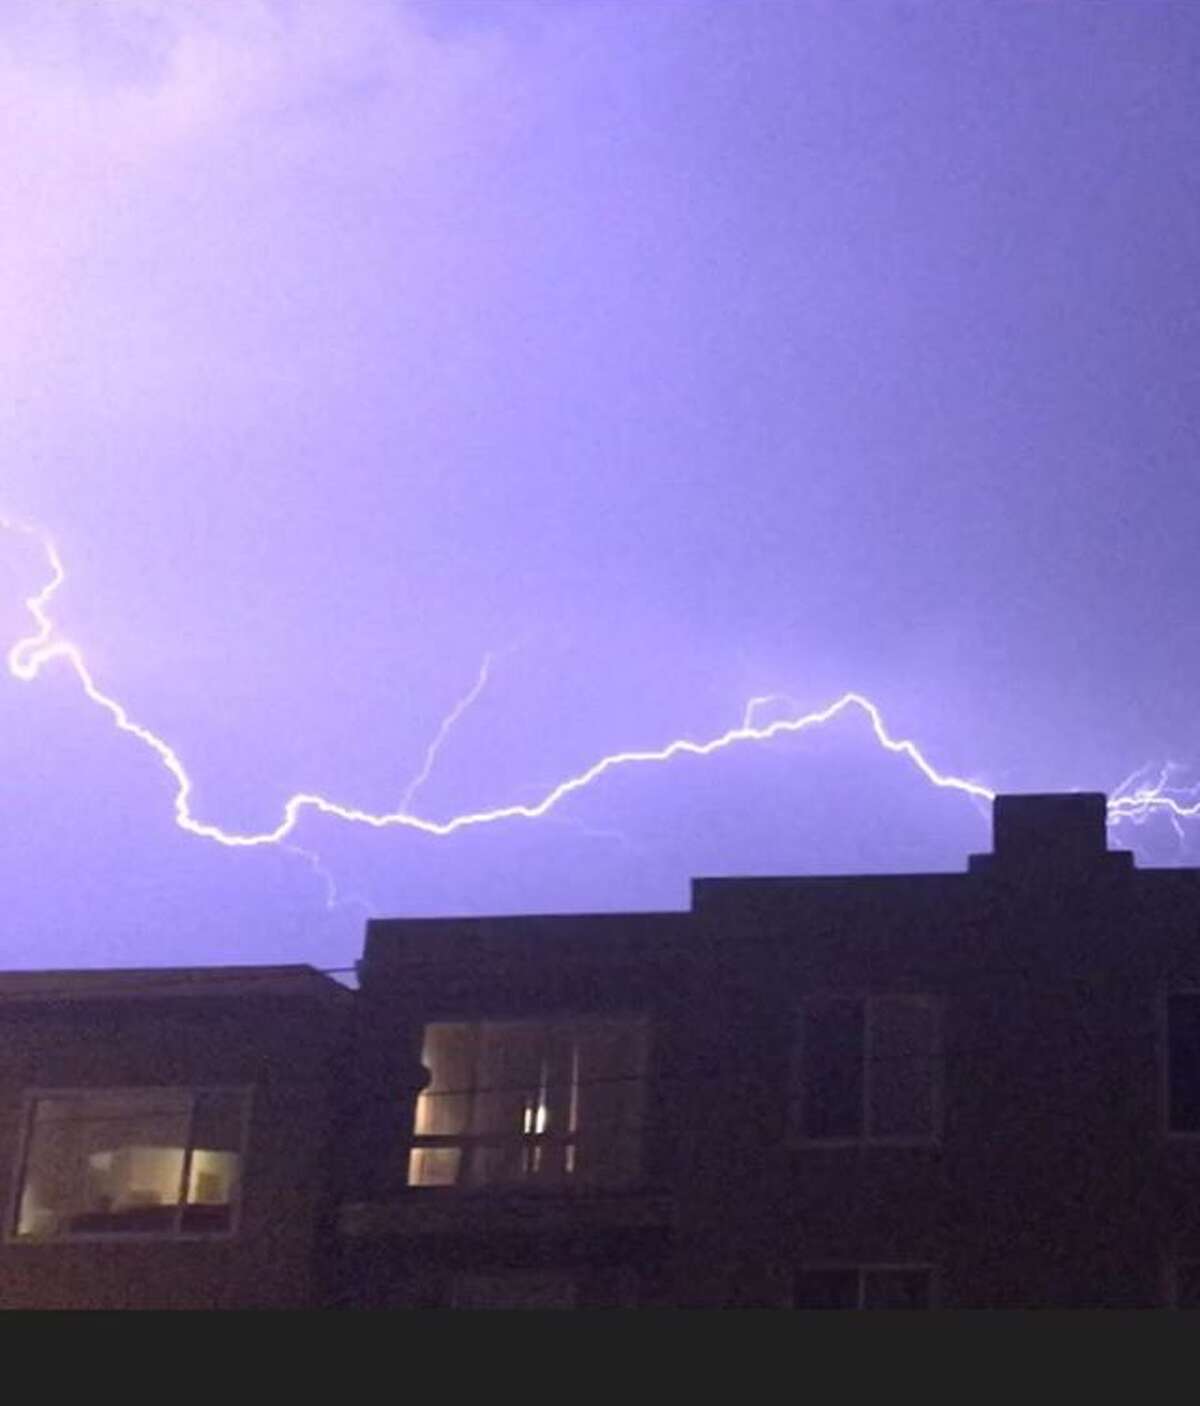 20 most spectacular photos from Monday night's lightning show